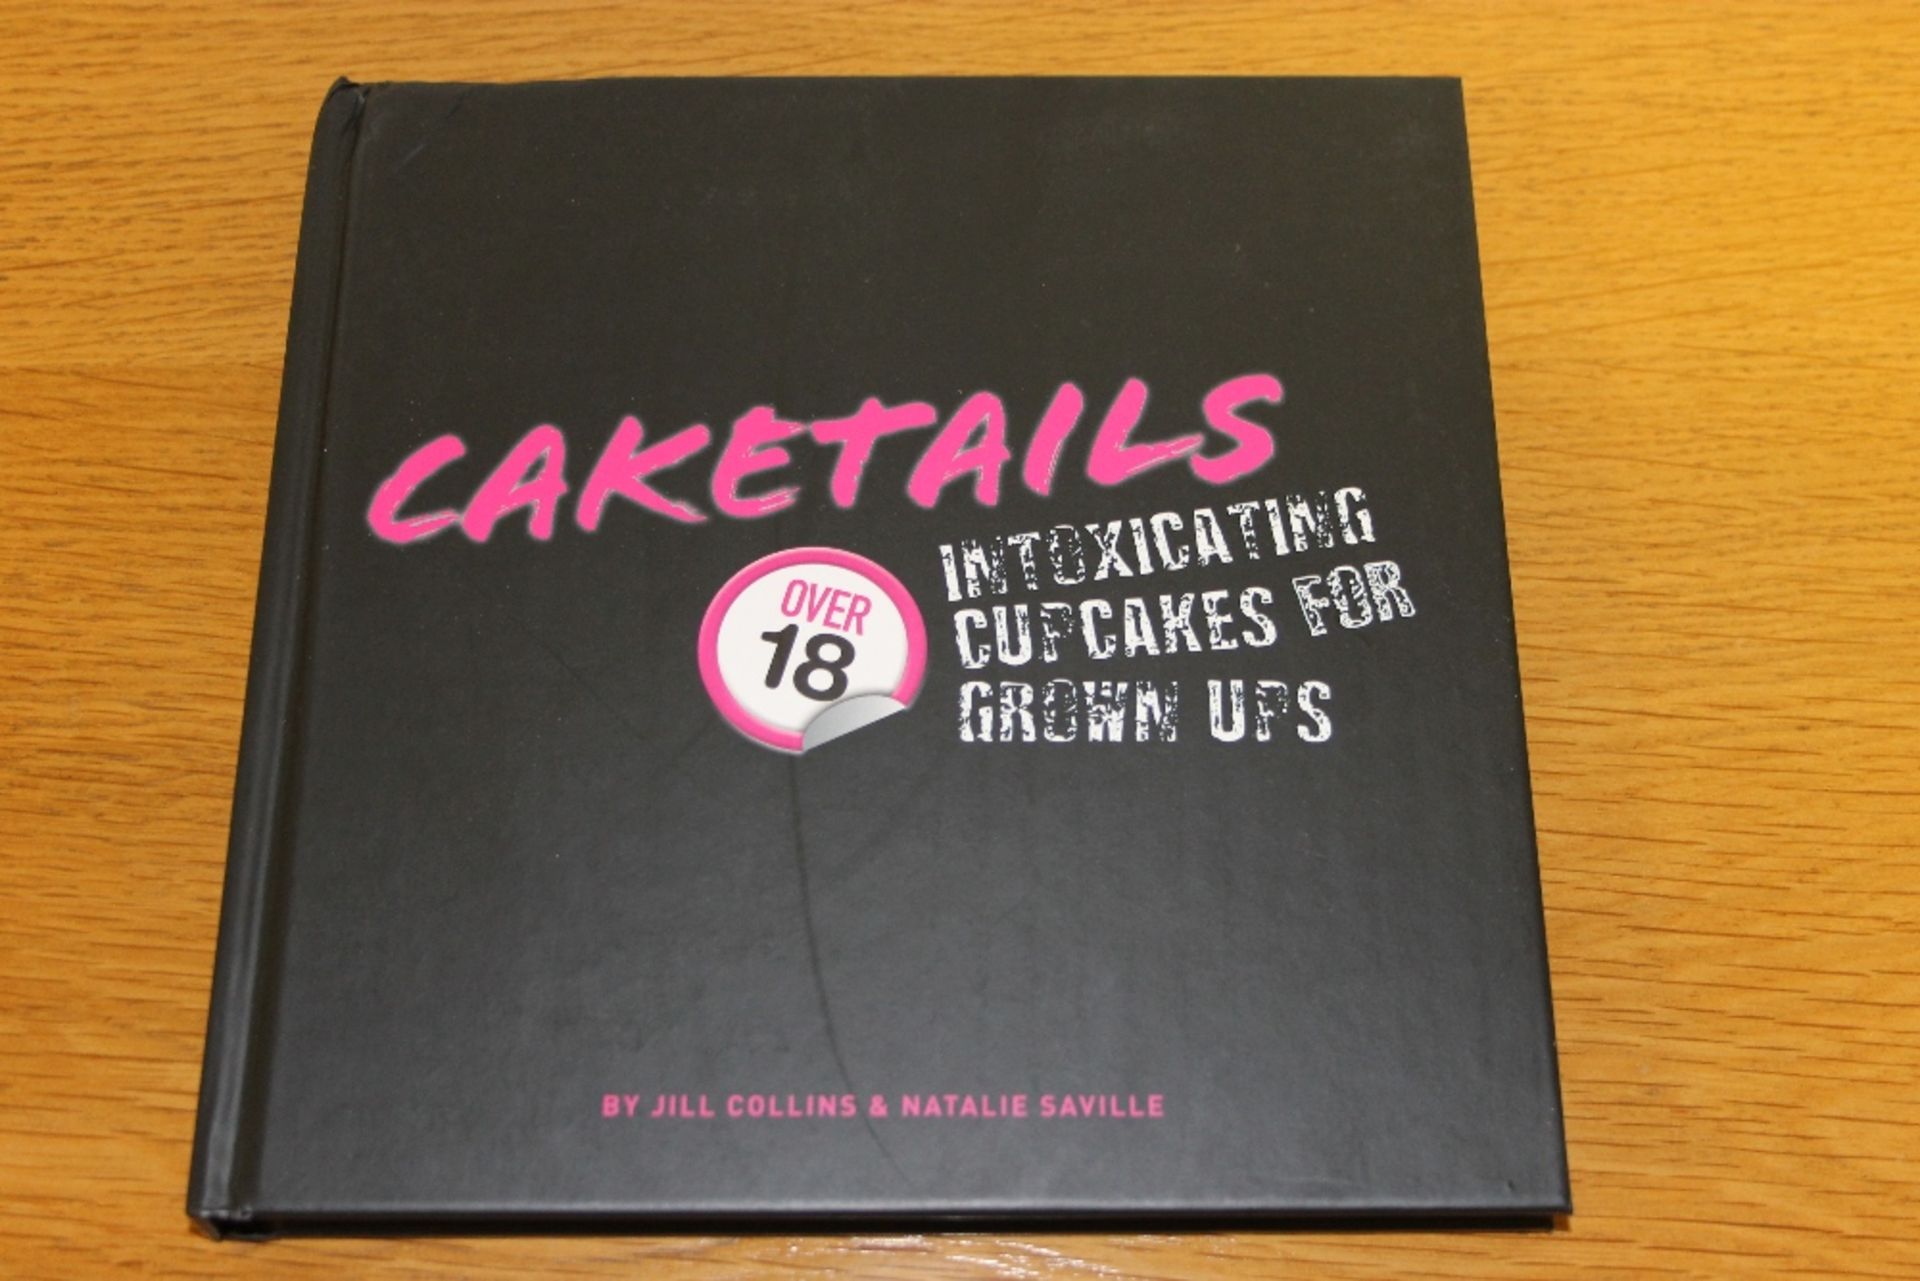 Caketails – Book on Intoxicating Cup Cakes for Grown Ups Pallet of Brand New Books – Approximately